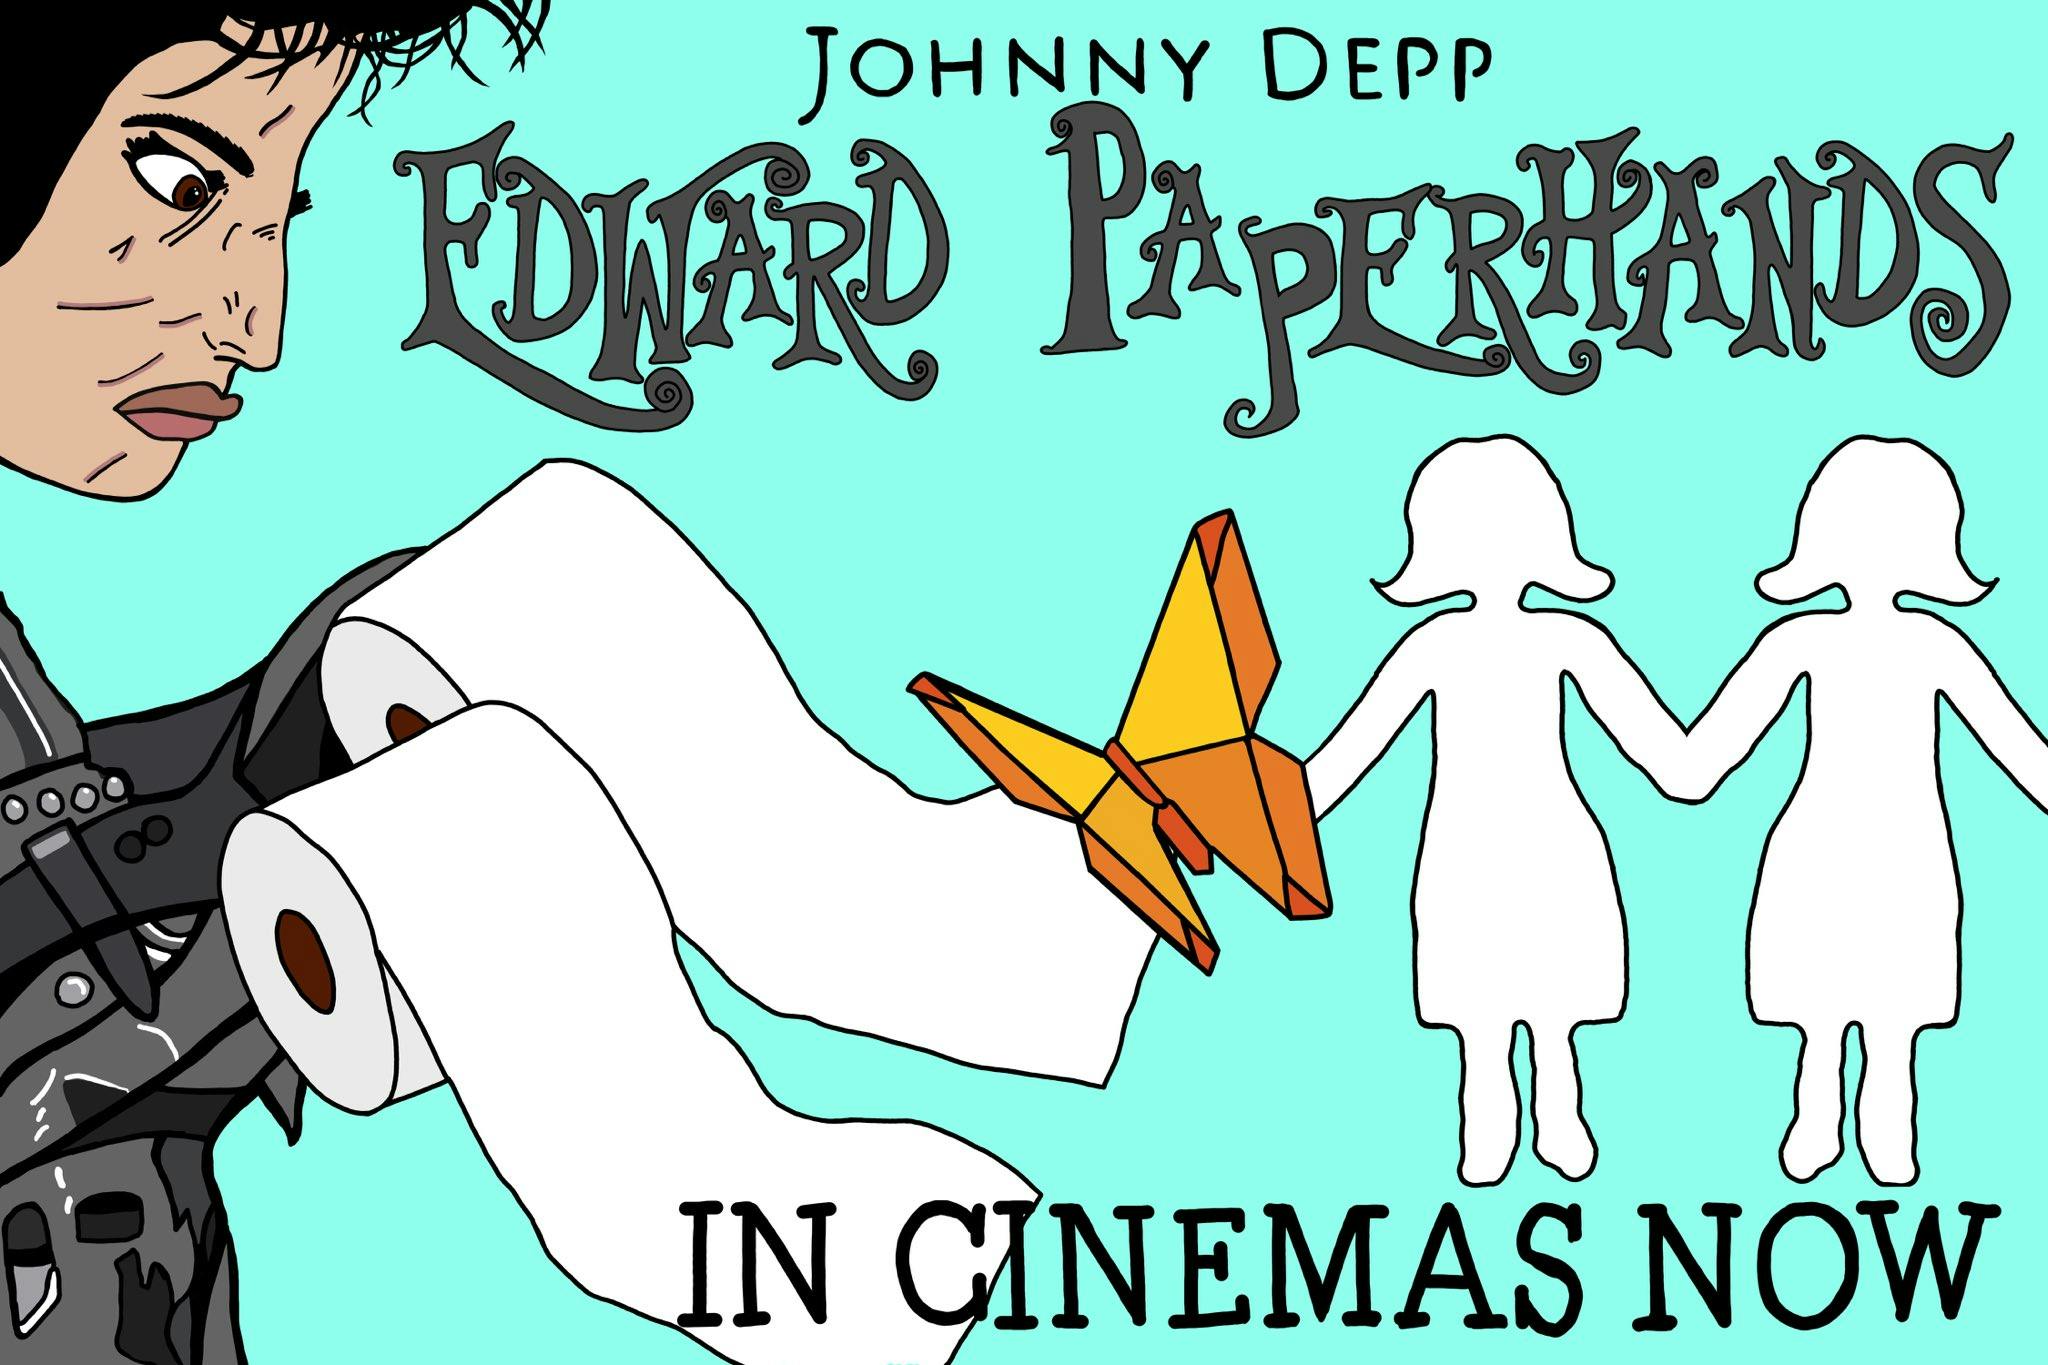 Edward Paperhands, Cover by CyOOt.